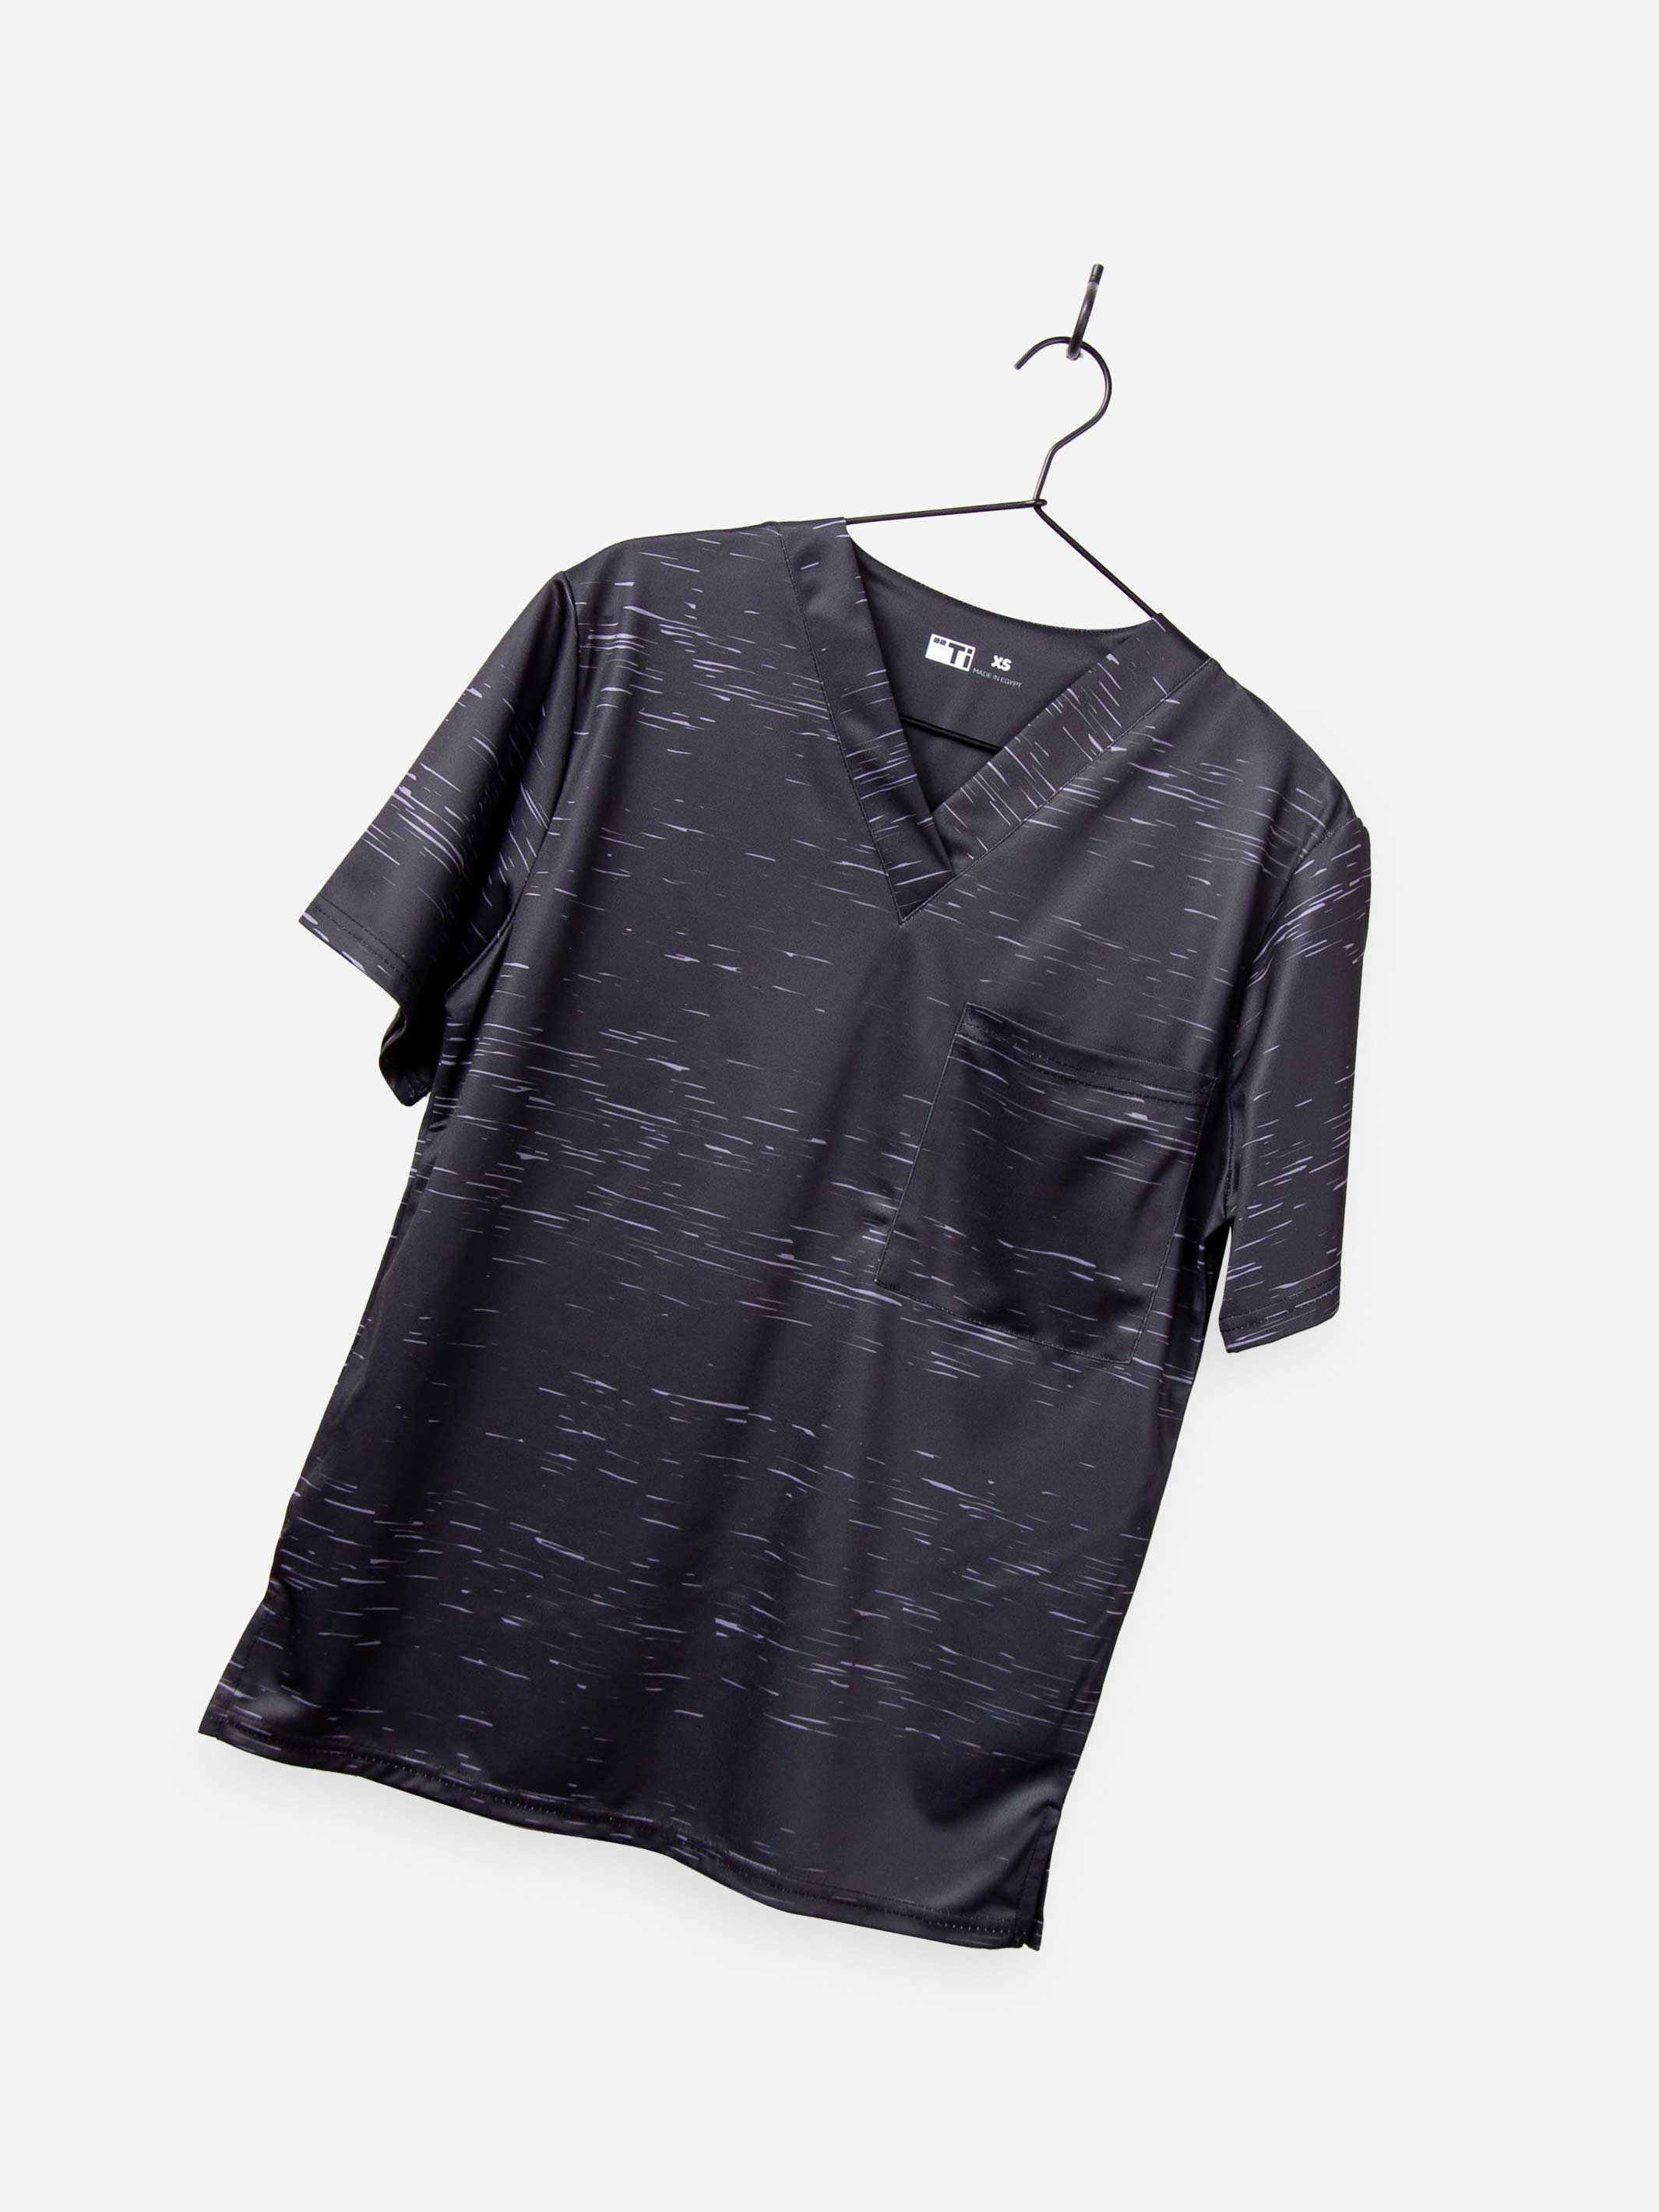 Men's Cool Print Scrub Top with Athletic Stripes and Static in Black performance fabric